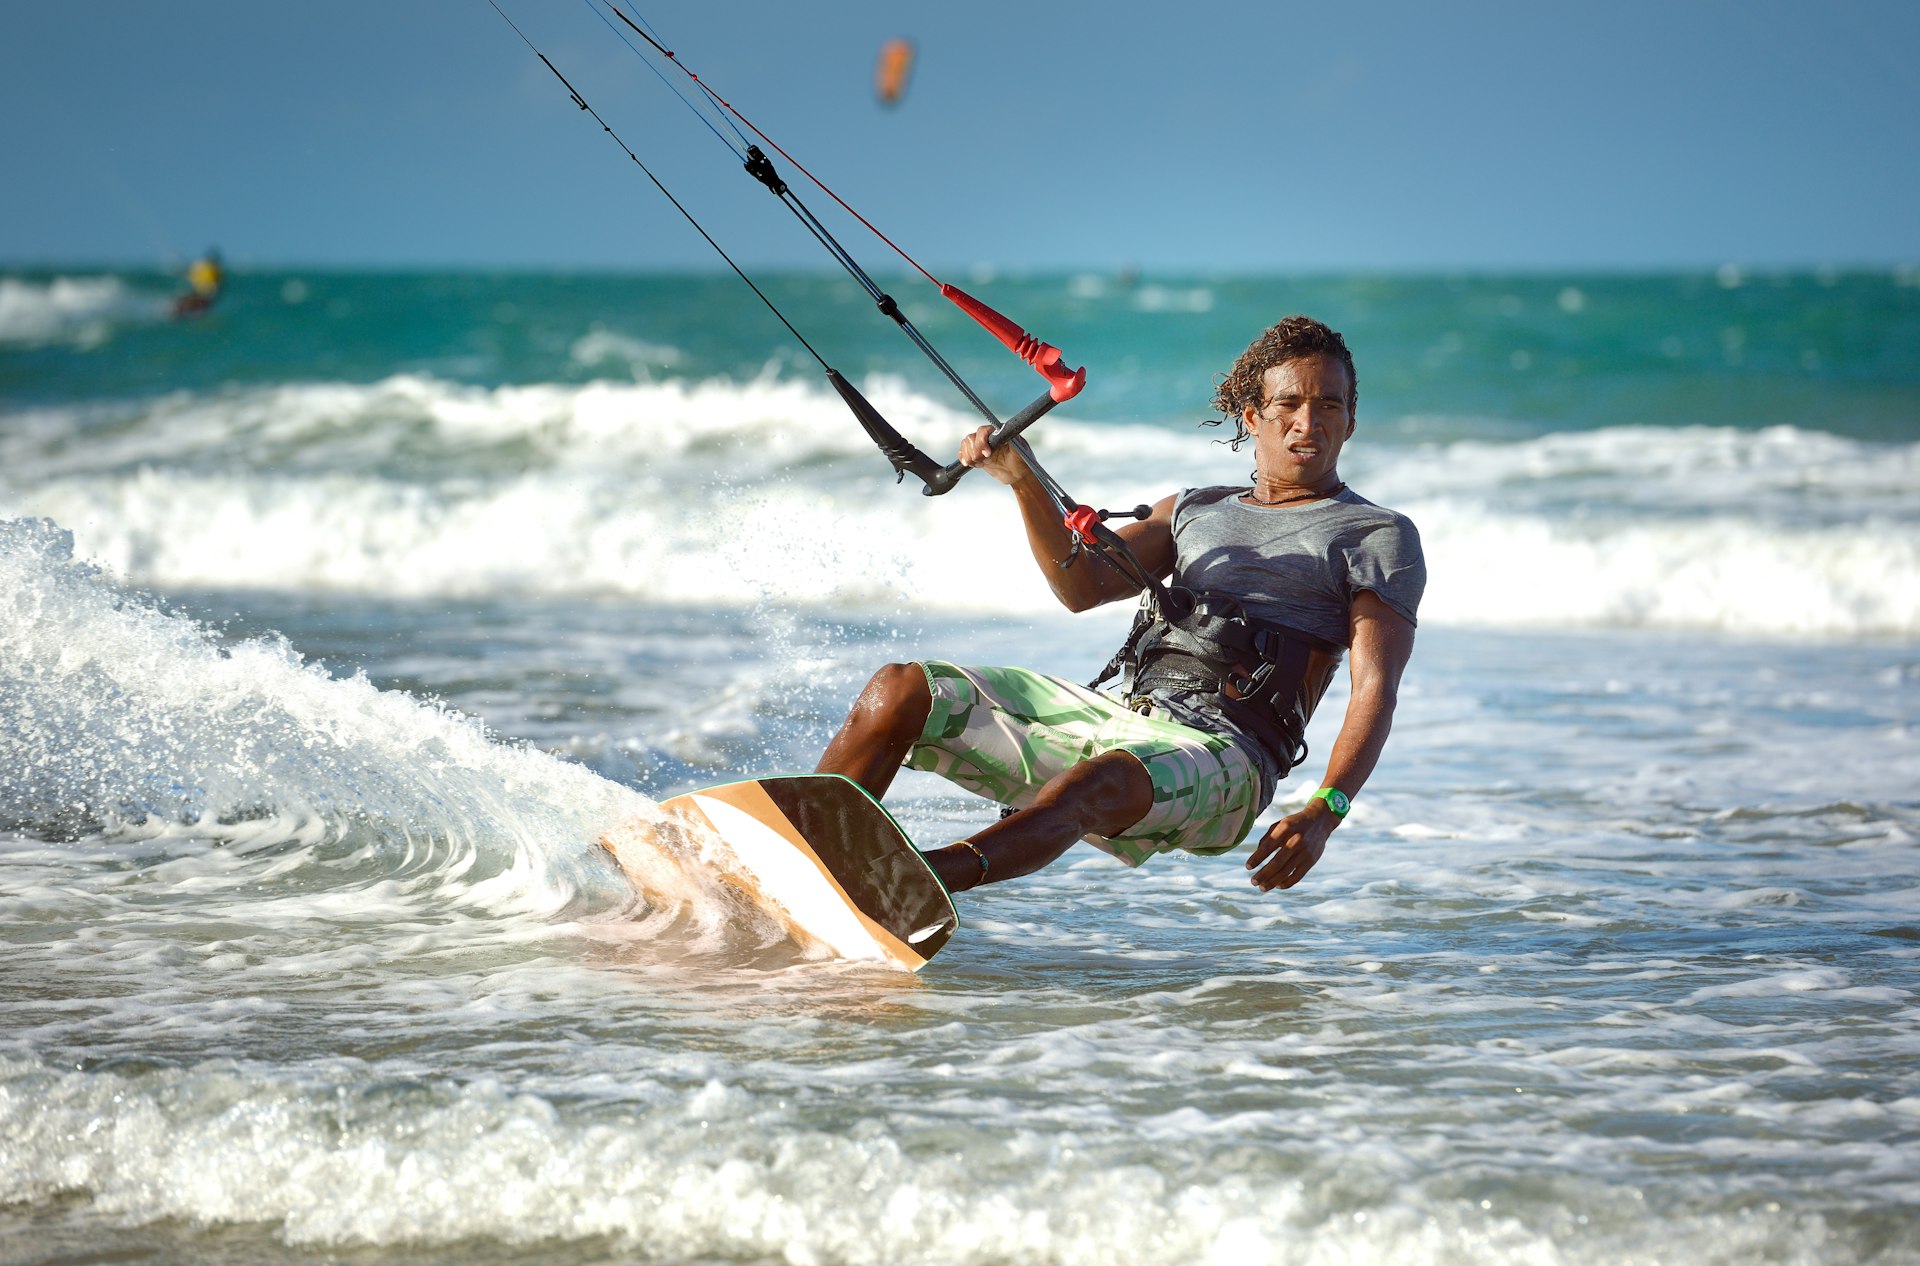 A kitesurfer catches a gust off the coast of Brazil